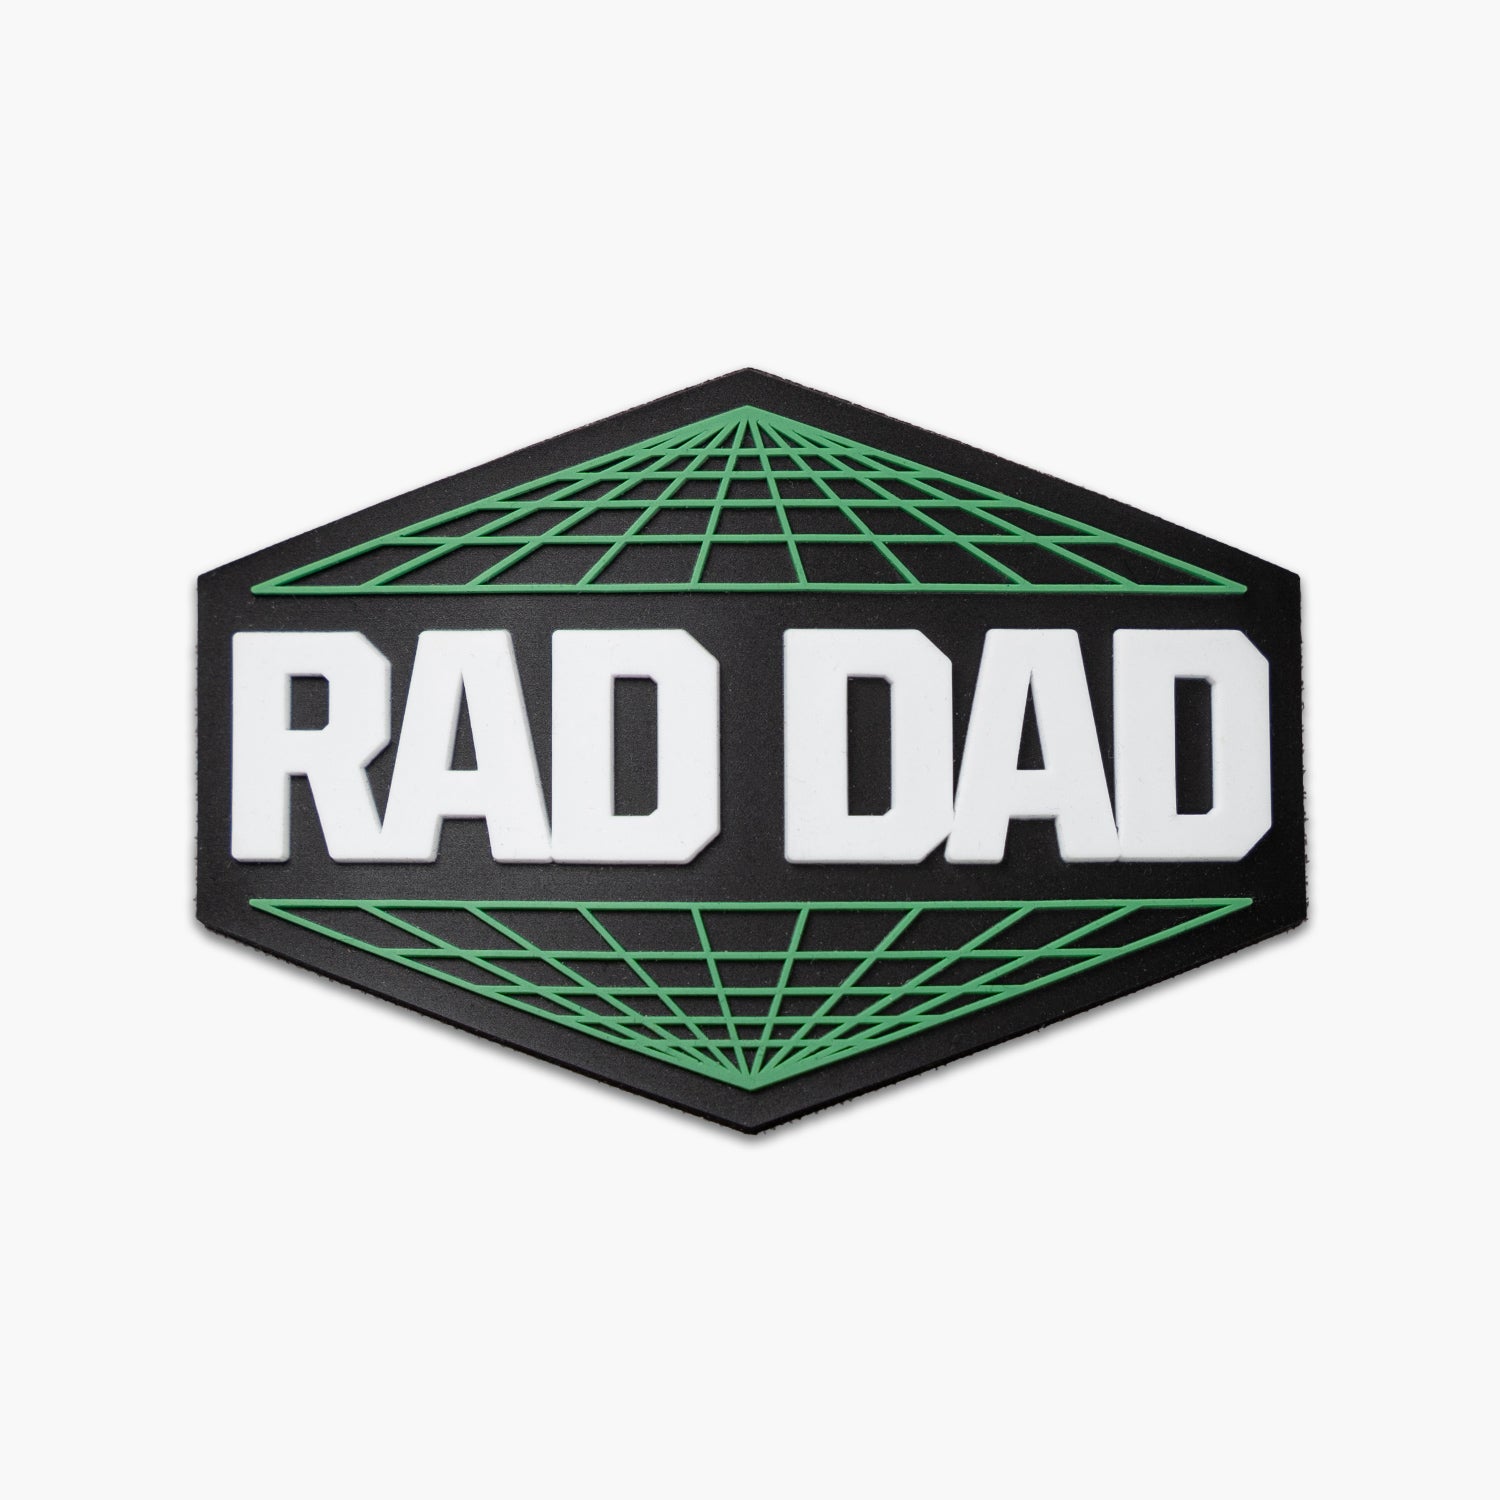 Black diamond shape patch with white text reading RAD DAD set off by green cyber space styling.